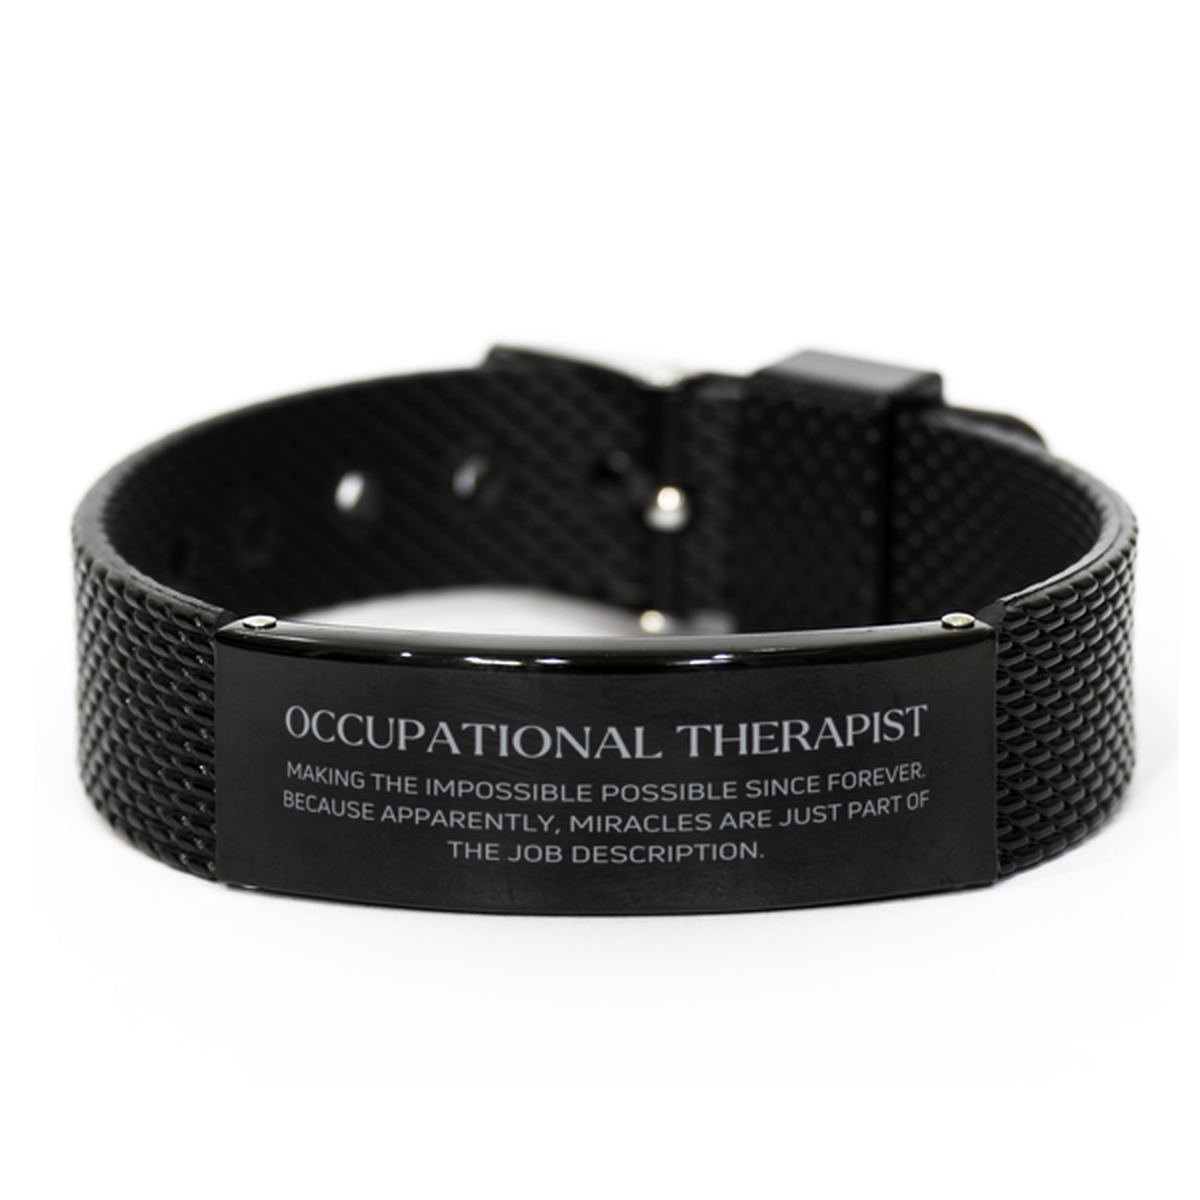 Funny Occupational Therapist Gifts, Miracles are just part of the job description, Inspirational Birthday Black Shark Mesh Bracelet For Occupational Therapist, Men, Women, Coworkers, Friends, Boss